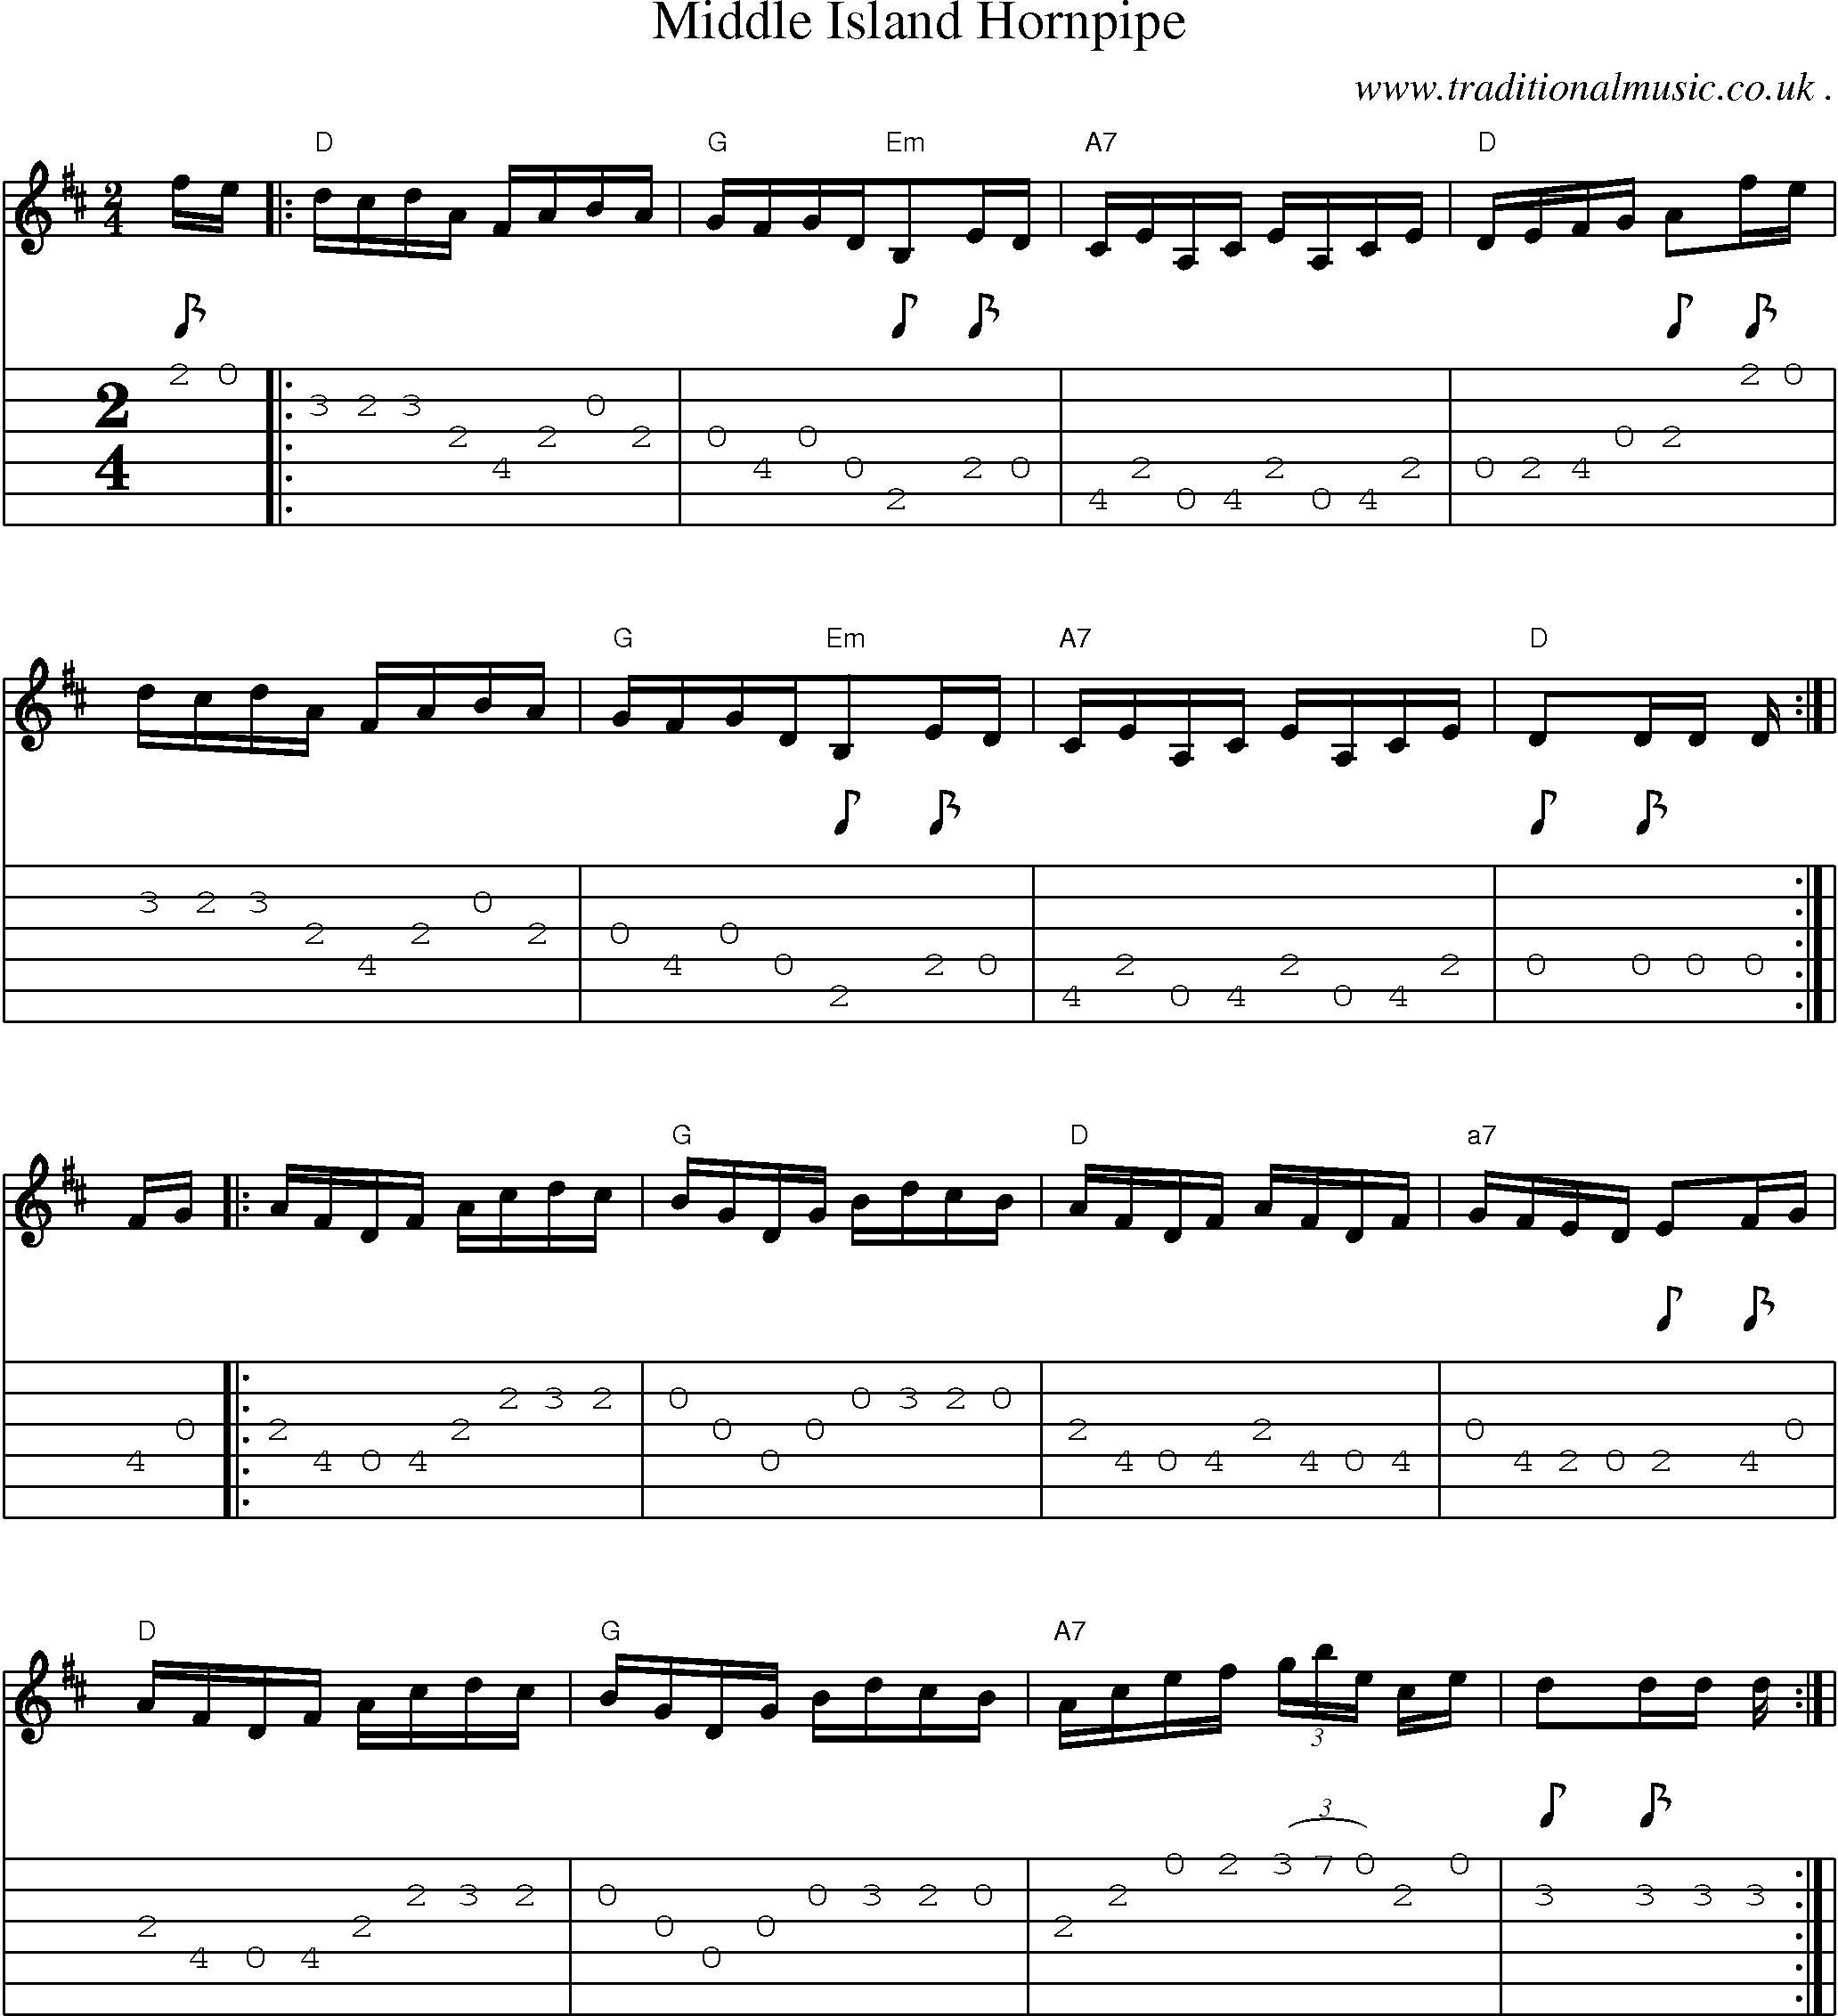 Sheet-Music and Guitar Tabs for Middle Island Hornpipe